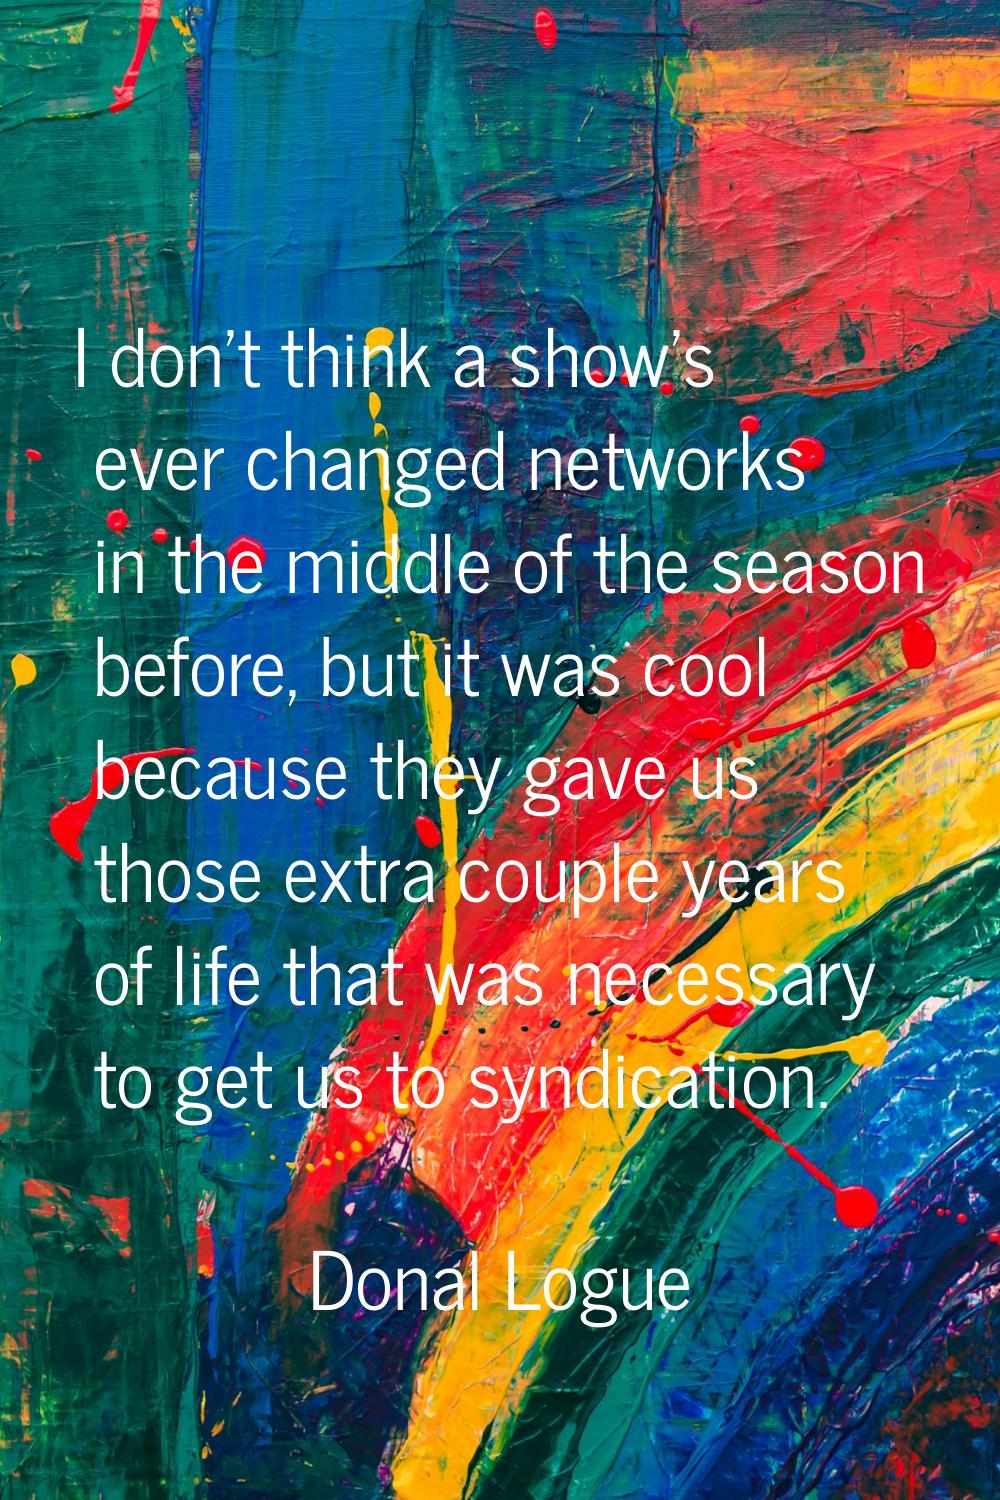 I don't think a show's ever changed networks in the middle of the season before, but it was cool be